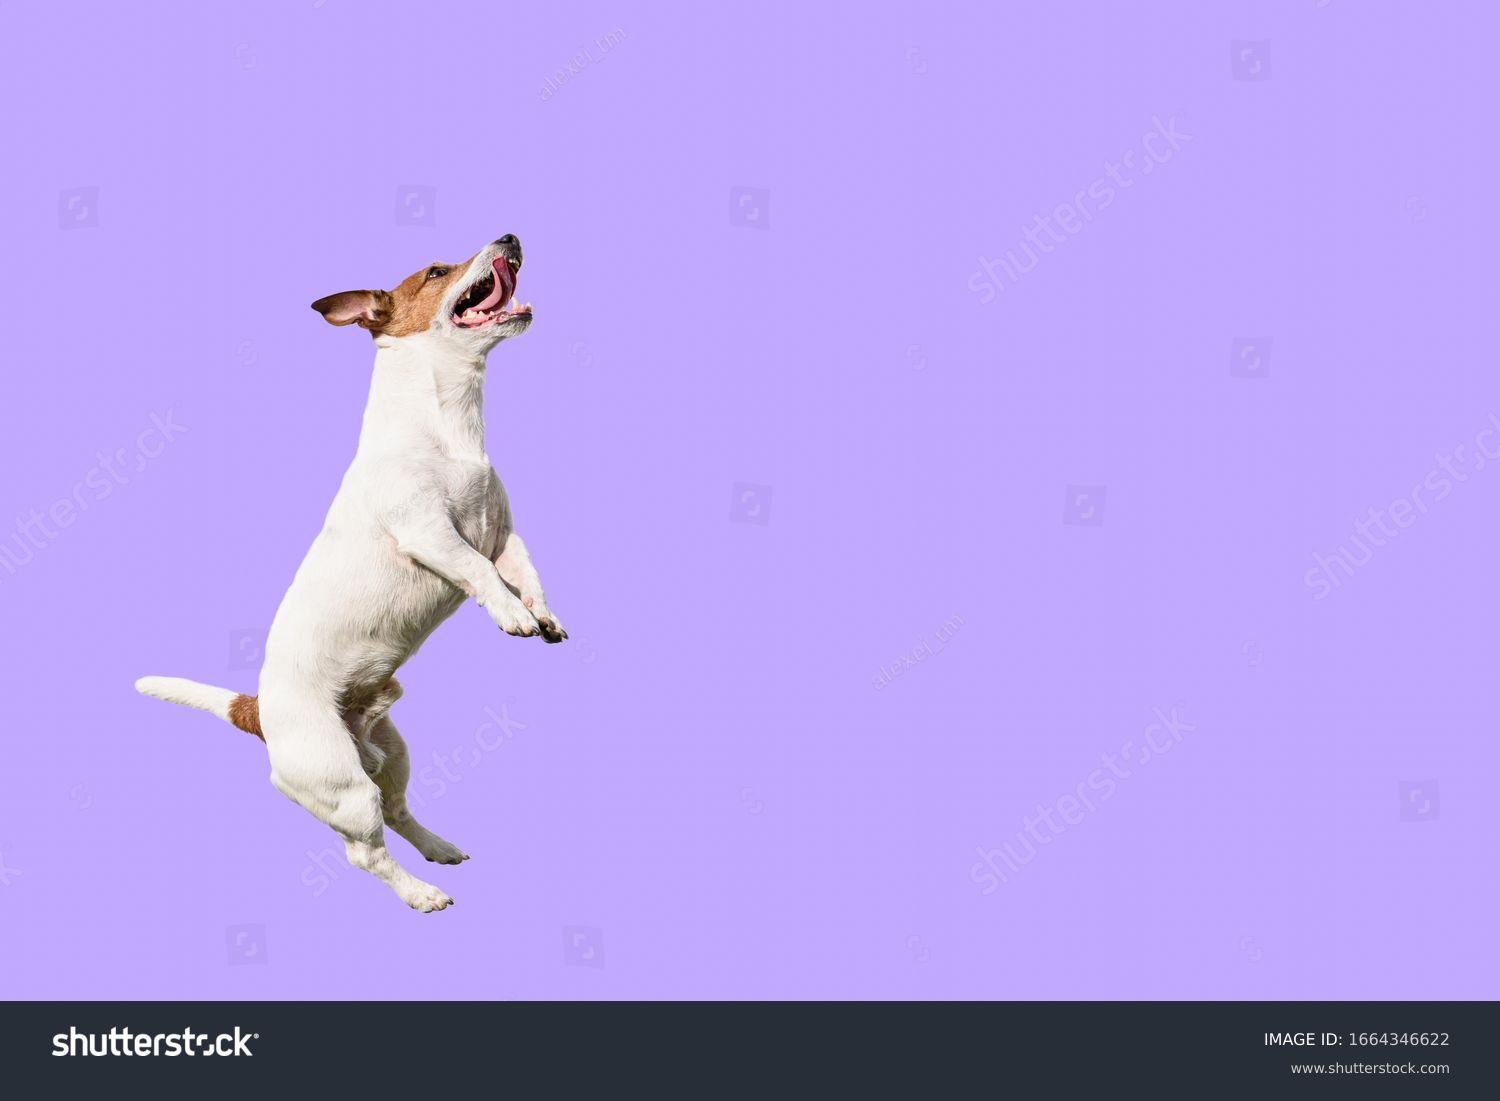 Active and agile dog jumping high on solid color purple background #1664346622